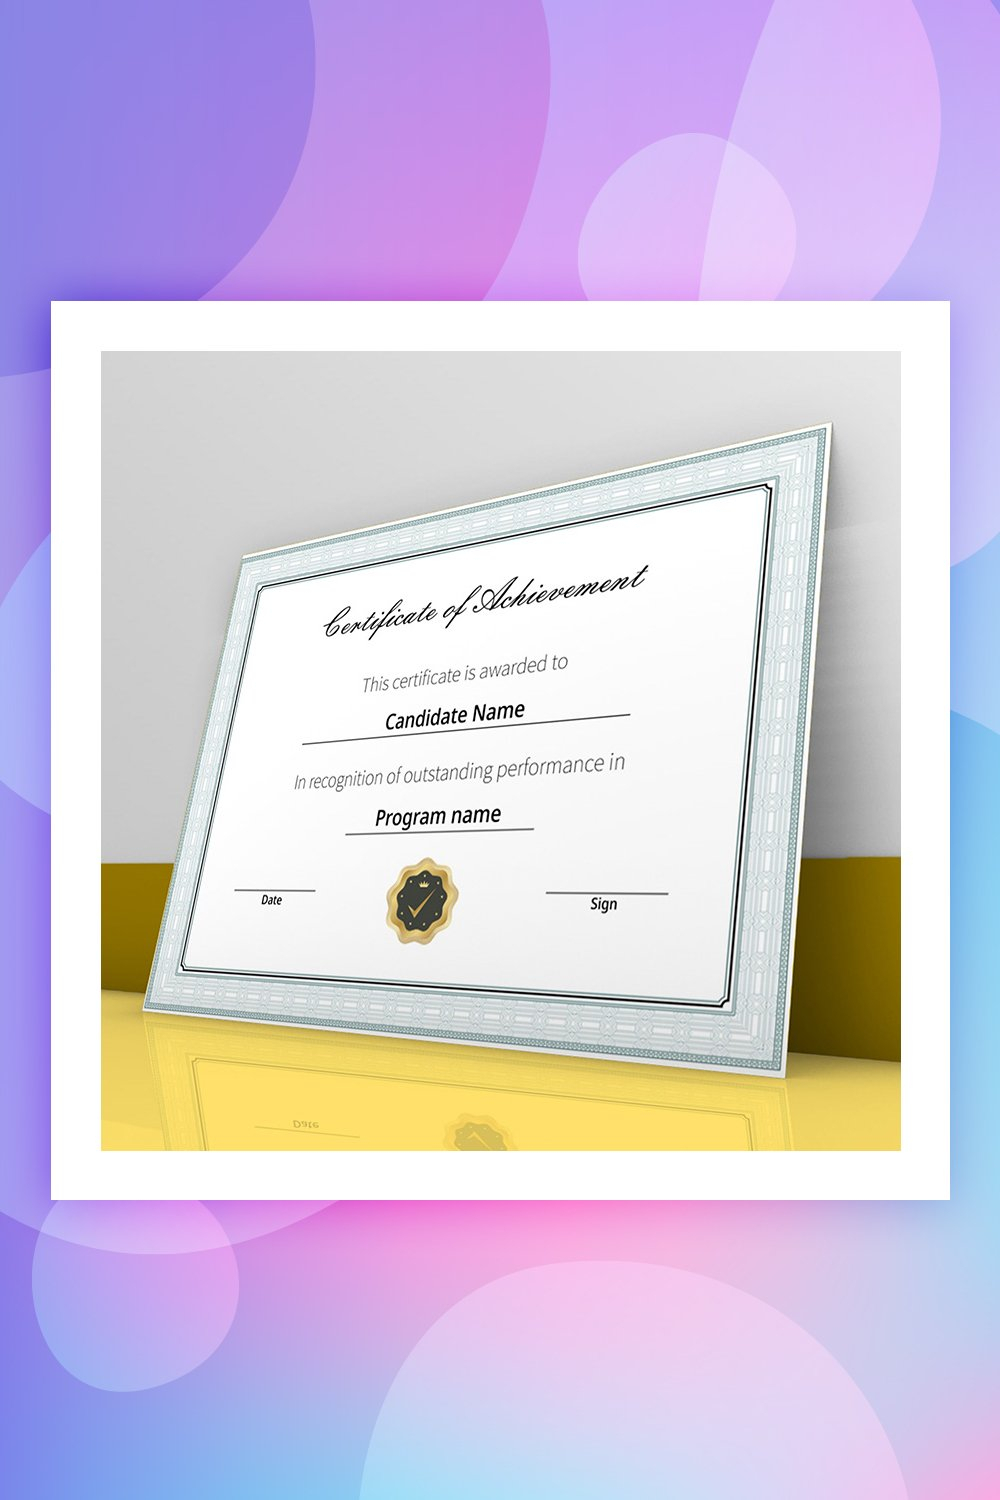 28 Attention Grabbing Certificate Templates - Colorlib Throughout No Certificate Templates Could Be Found